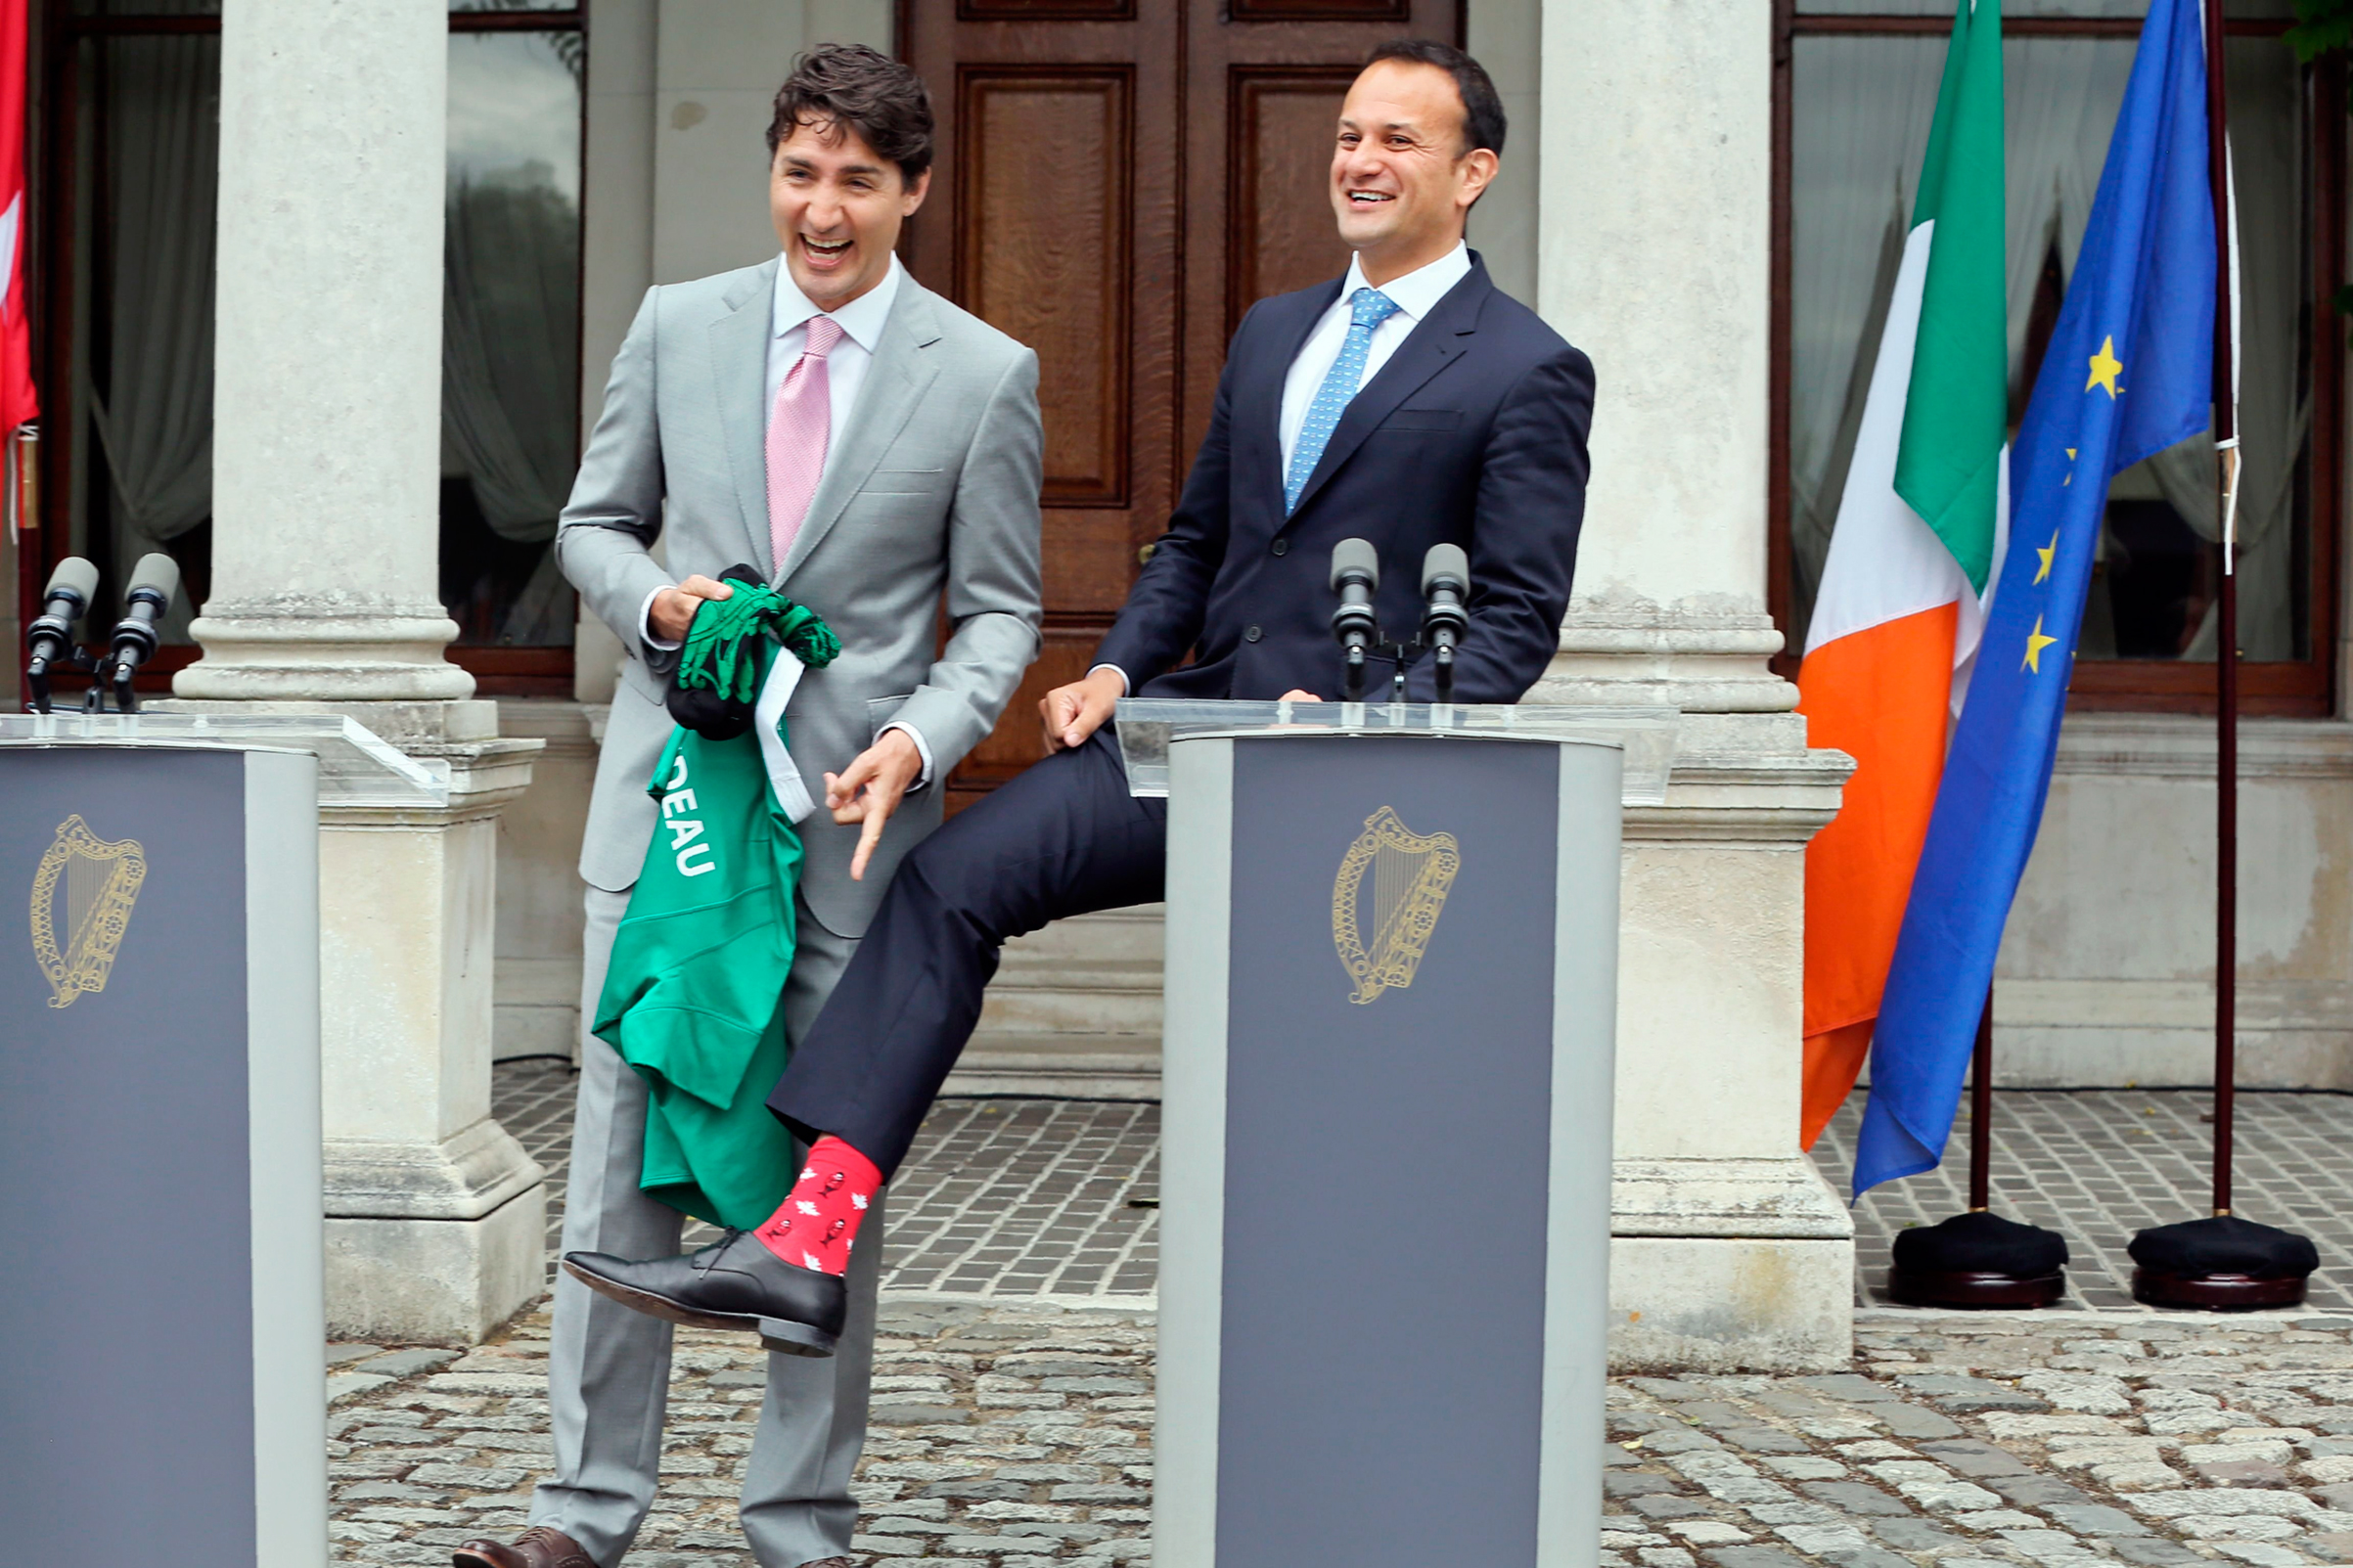 Varadkar, right, hosted Canada’s Justin Trudeau just weeks after taking office (Paul Faith—AFP/Getty Images)